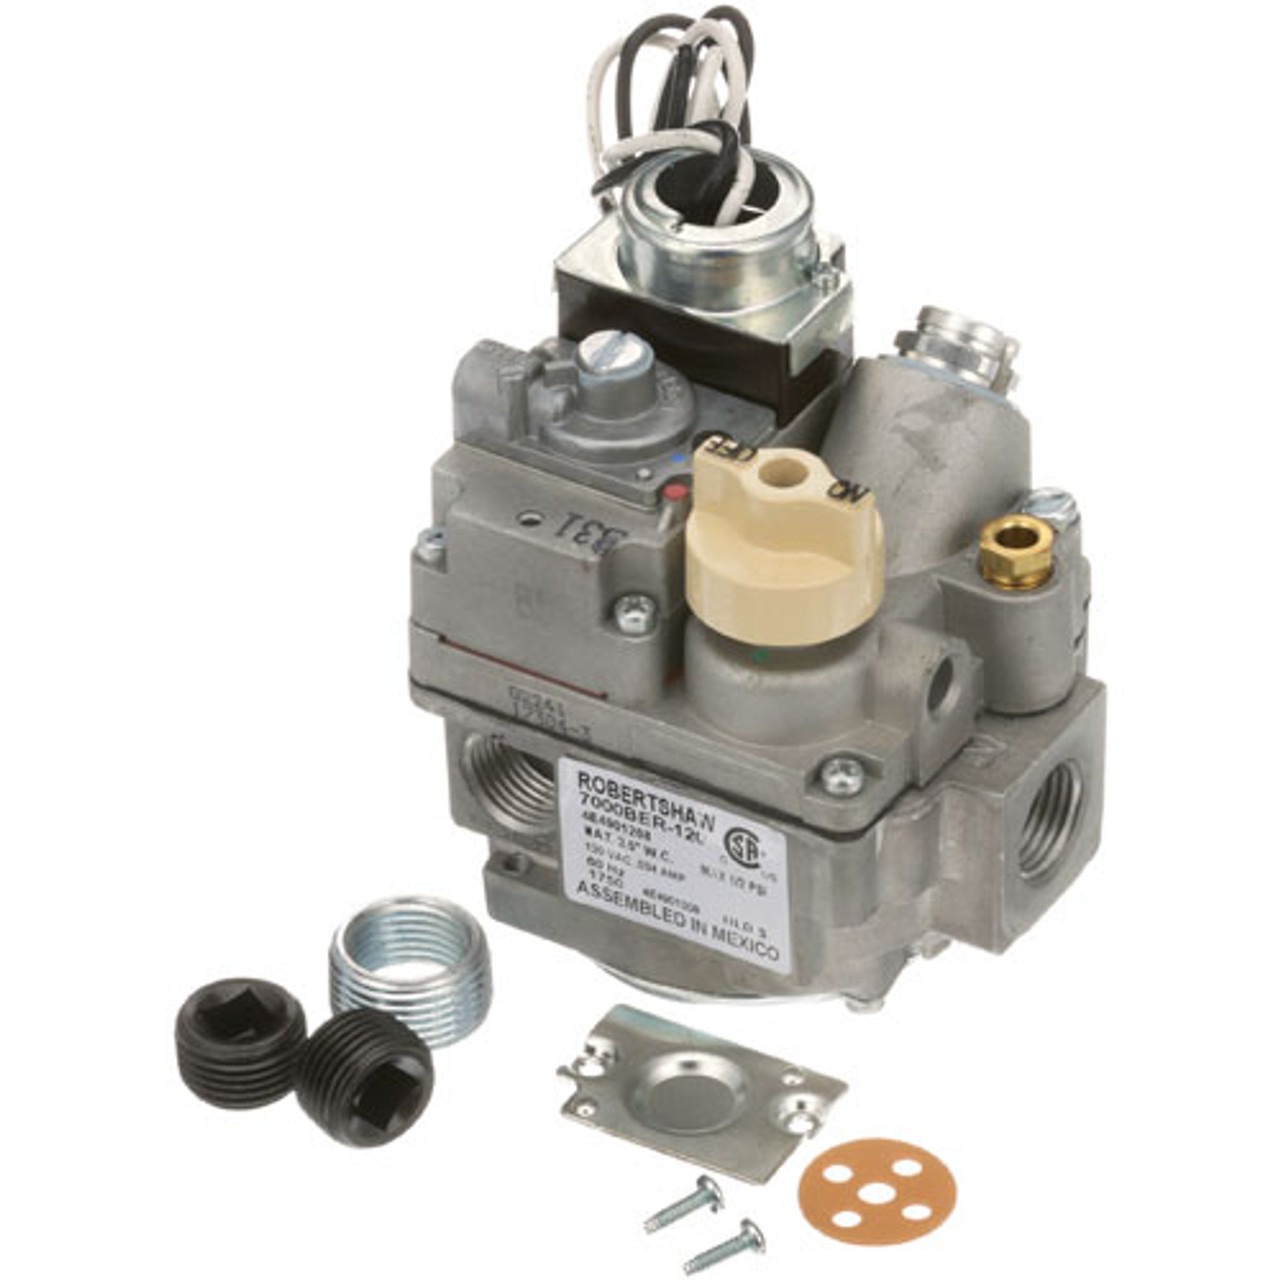 Gas Control - Replacement Part For Southbend 1164804